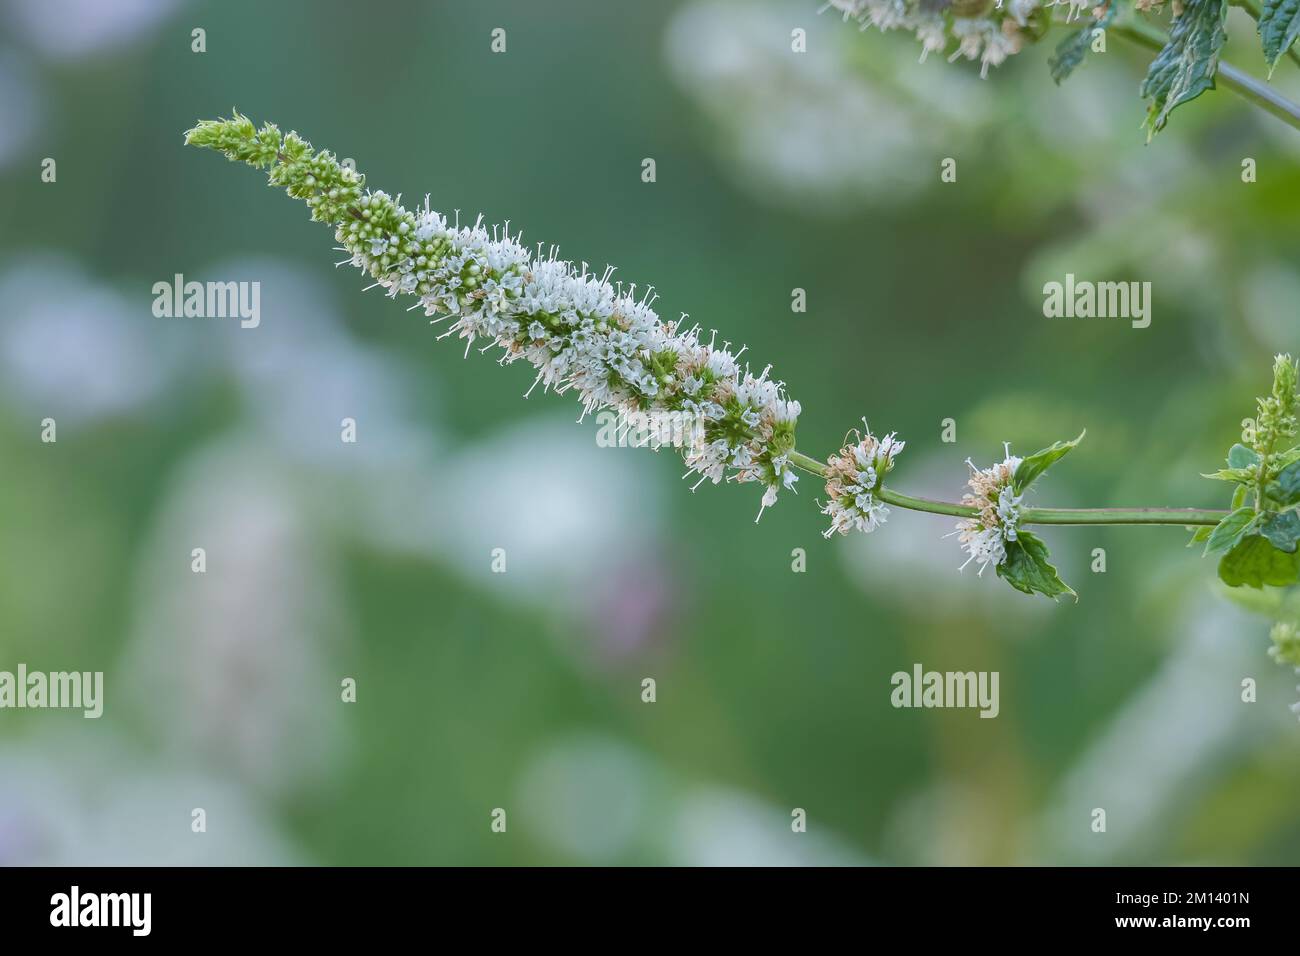 flower of peppermint plant grows with sunlight in outdoor garden Stock Photo